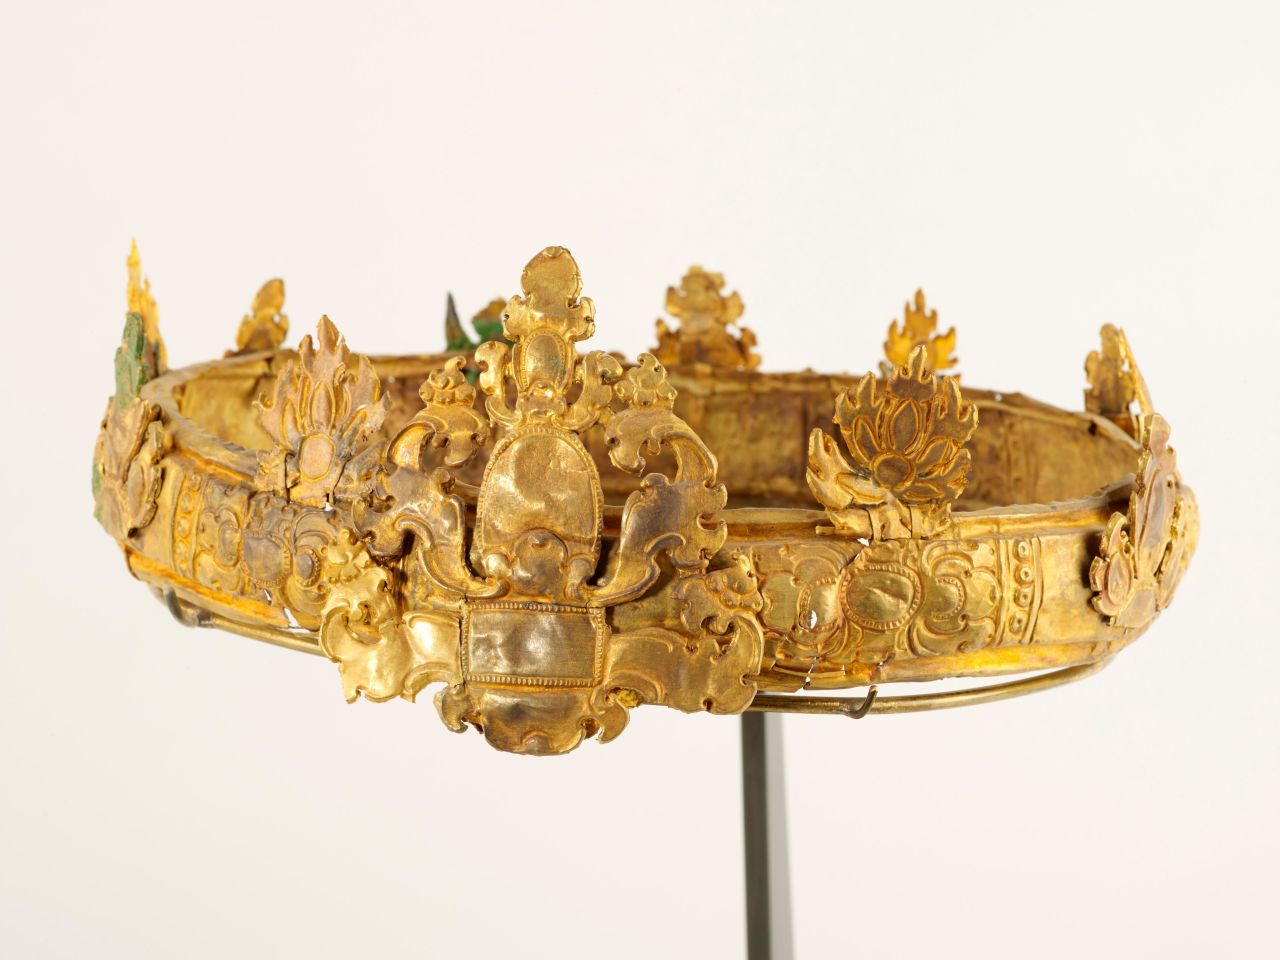 Dozens of Cambodian crown jewels were among the pieces returned.